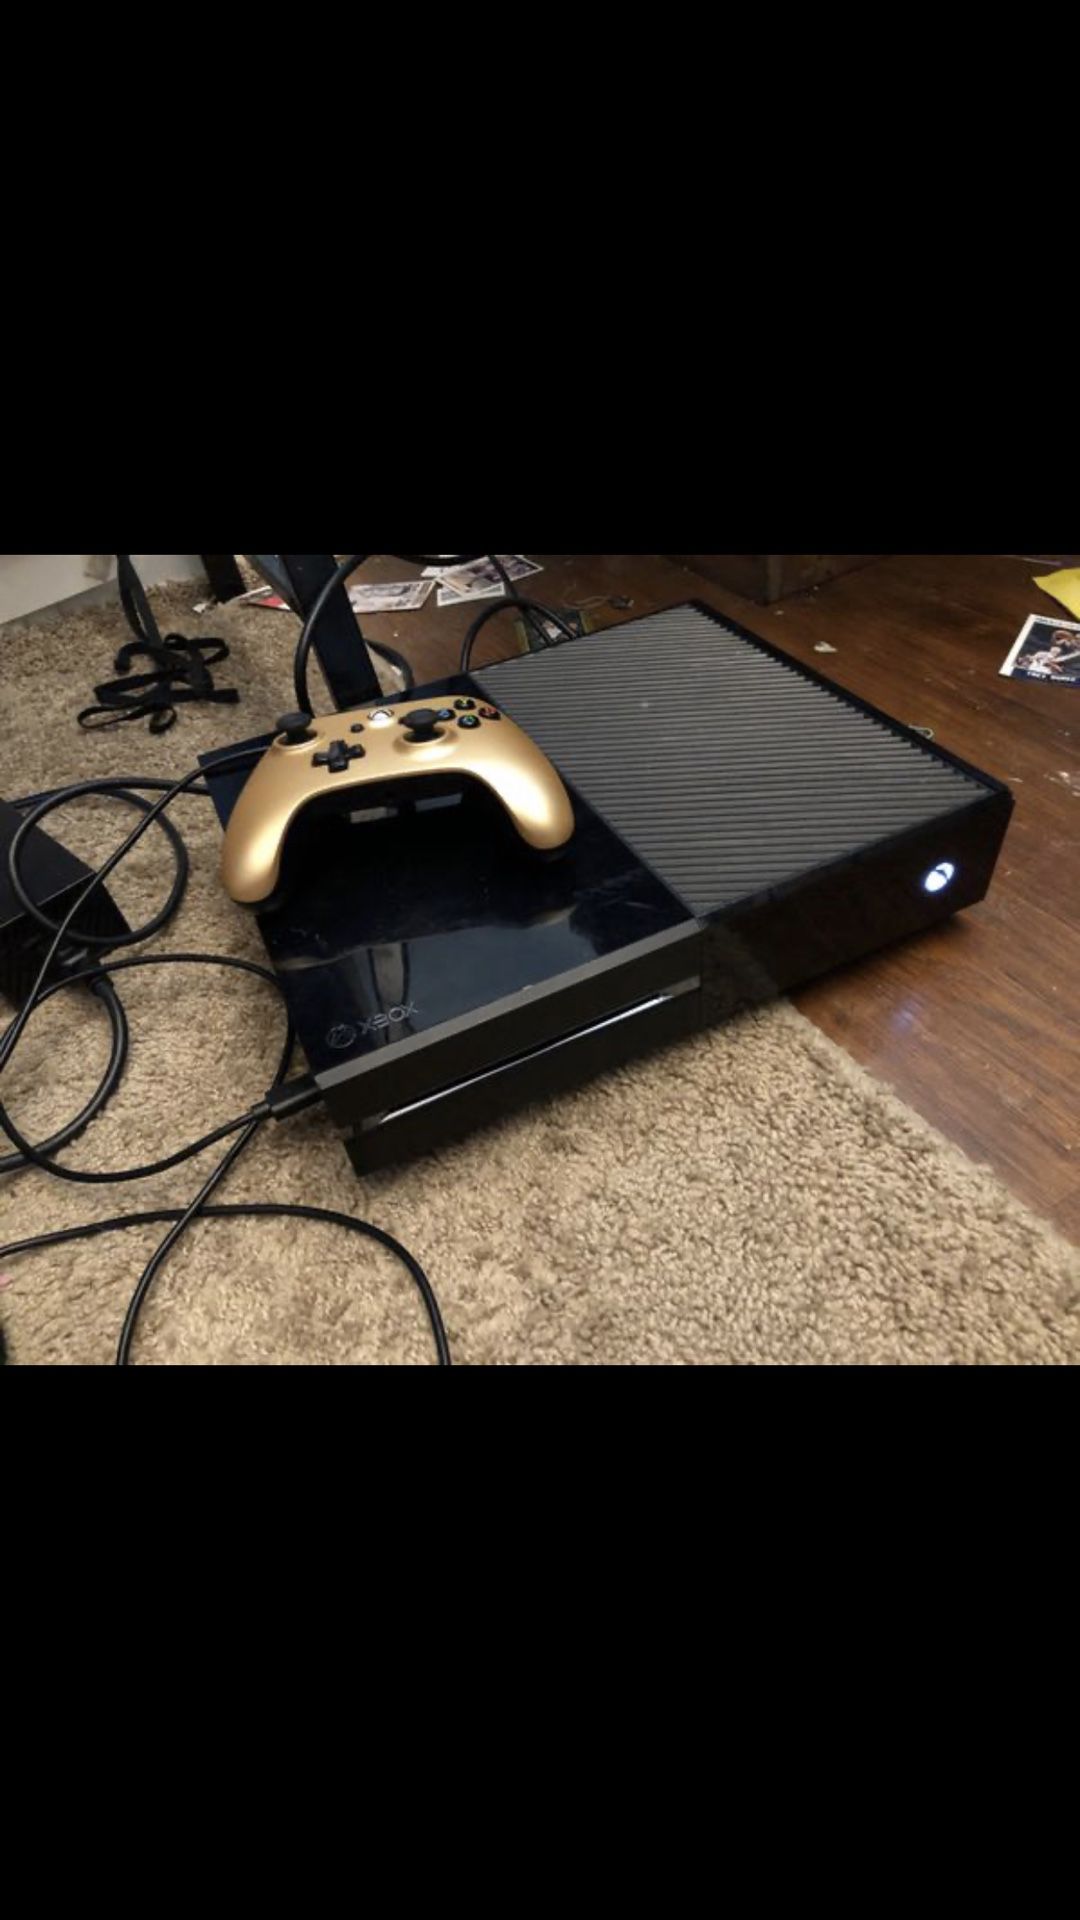 Xbox 1 with brand new power a controller will trade for PS4